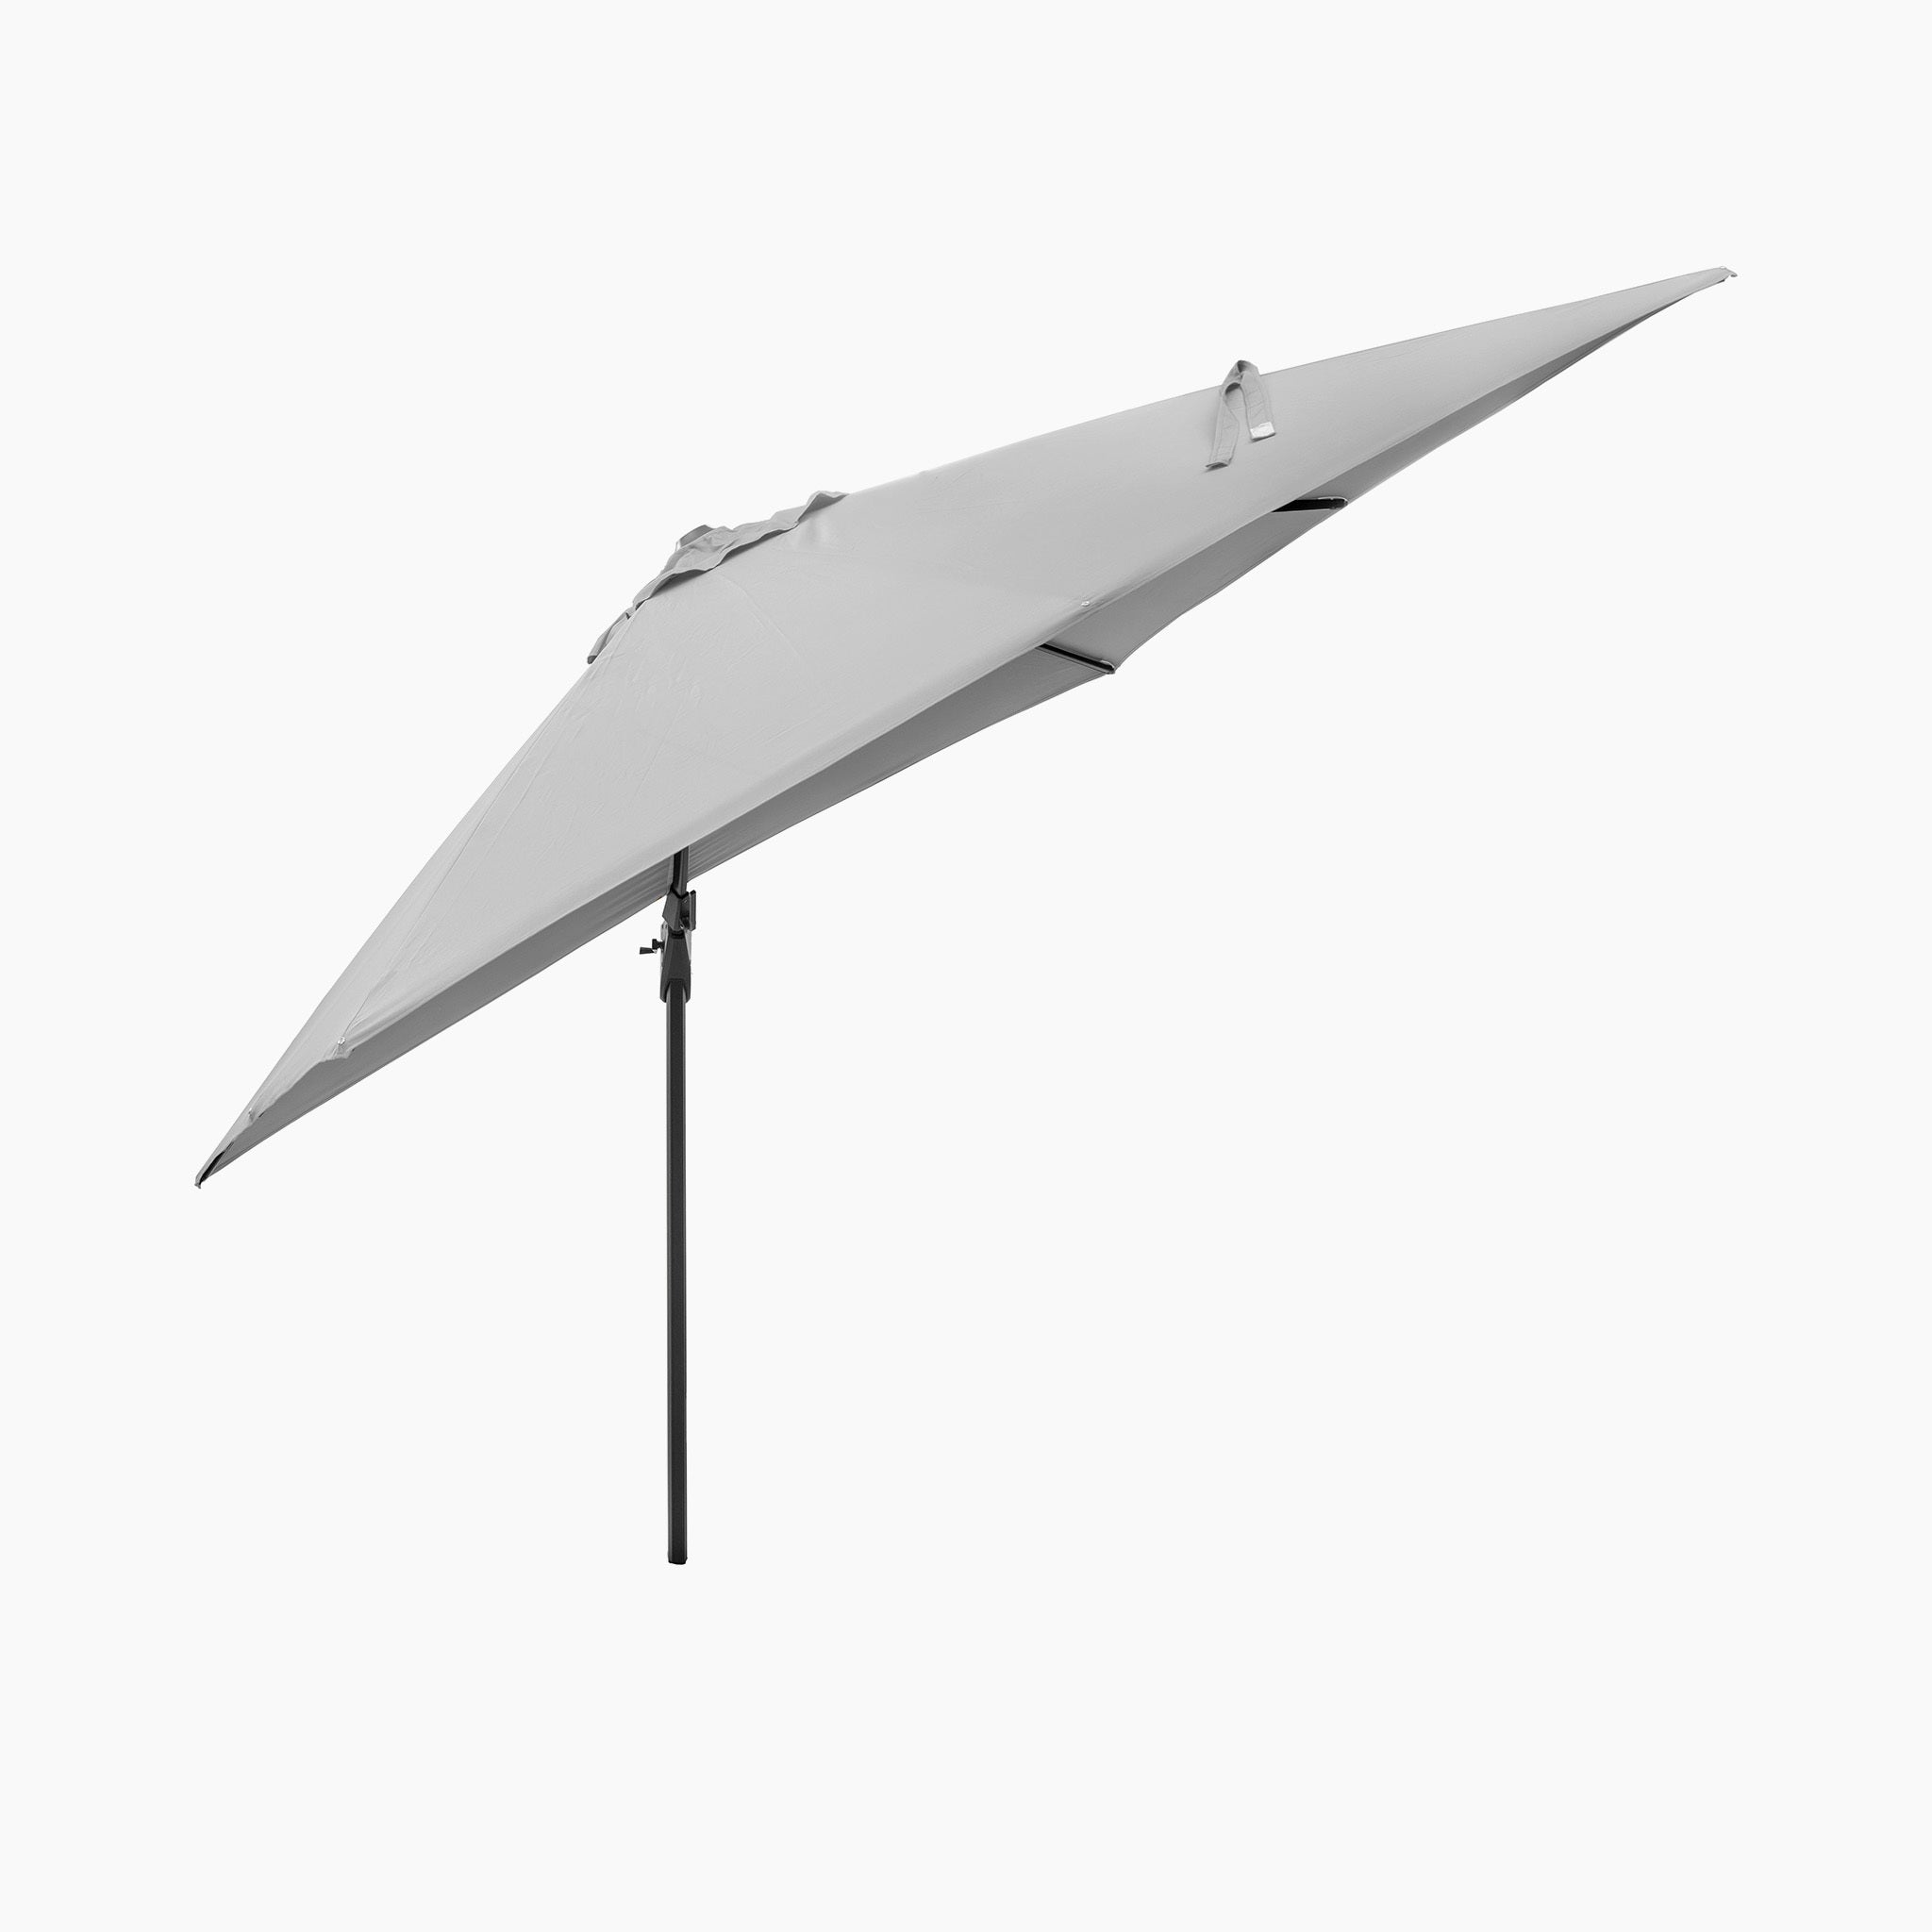 Challenger T2 3m Square Cantilever Parasol in Grey